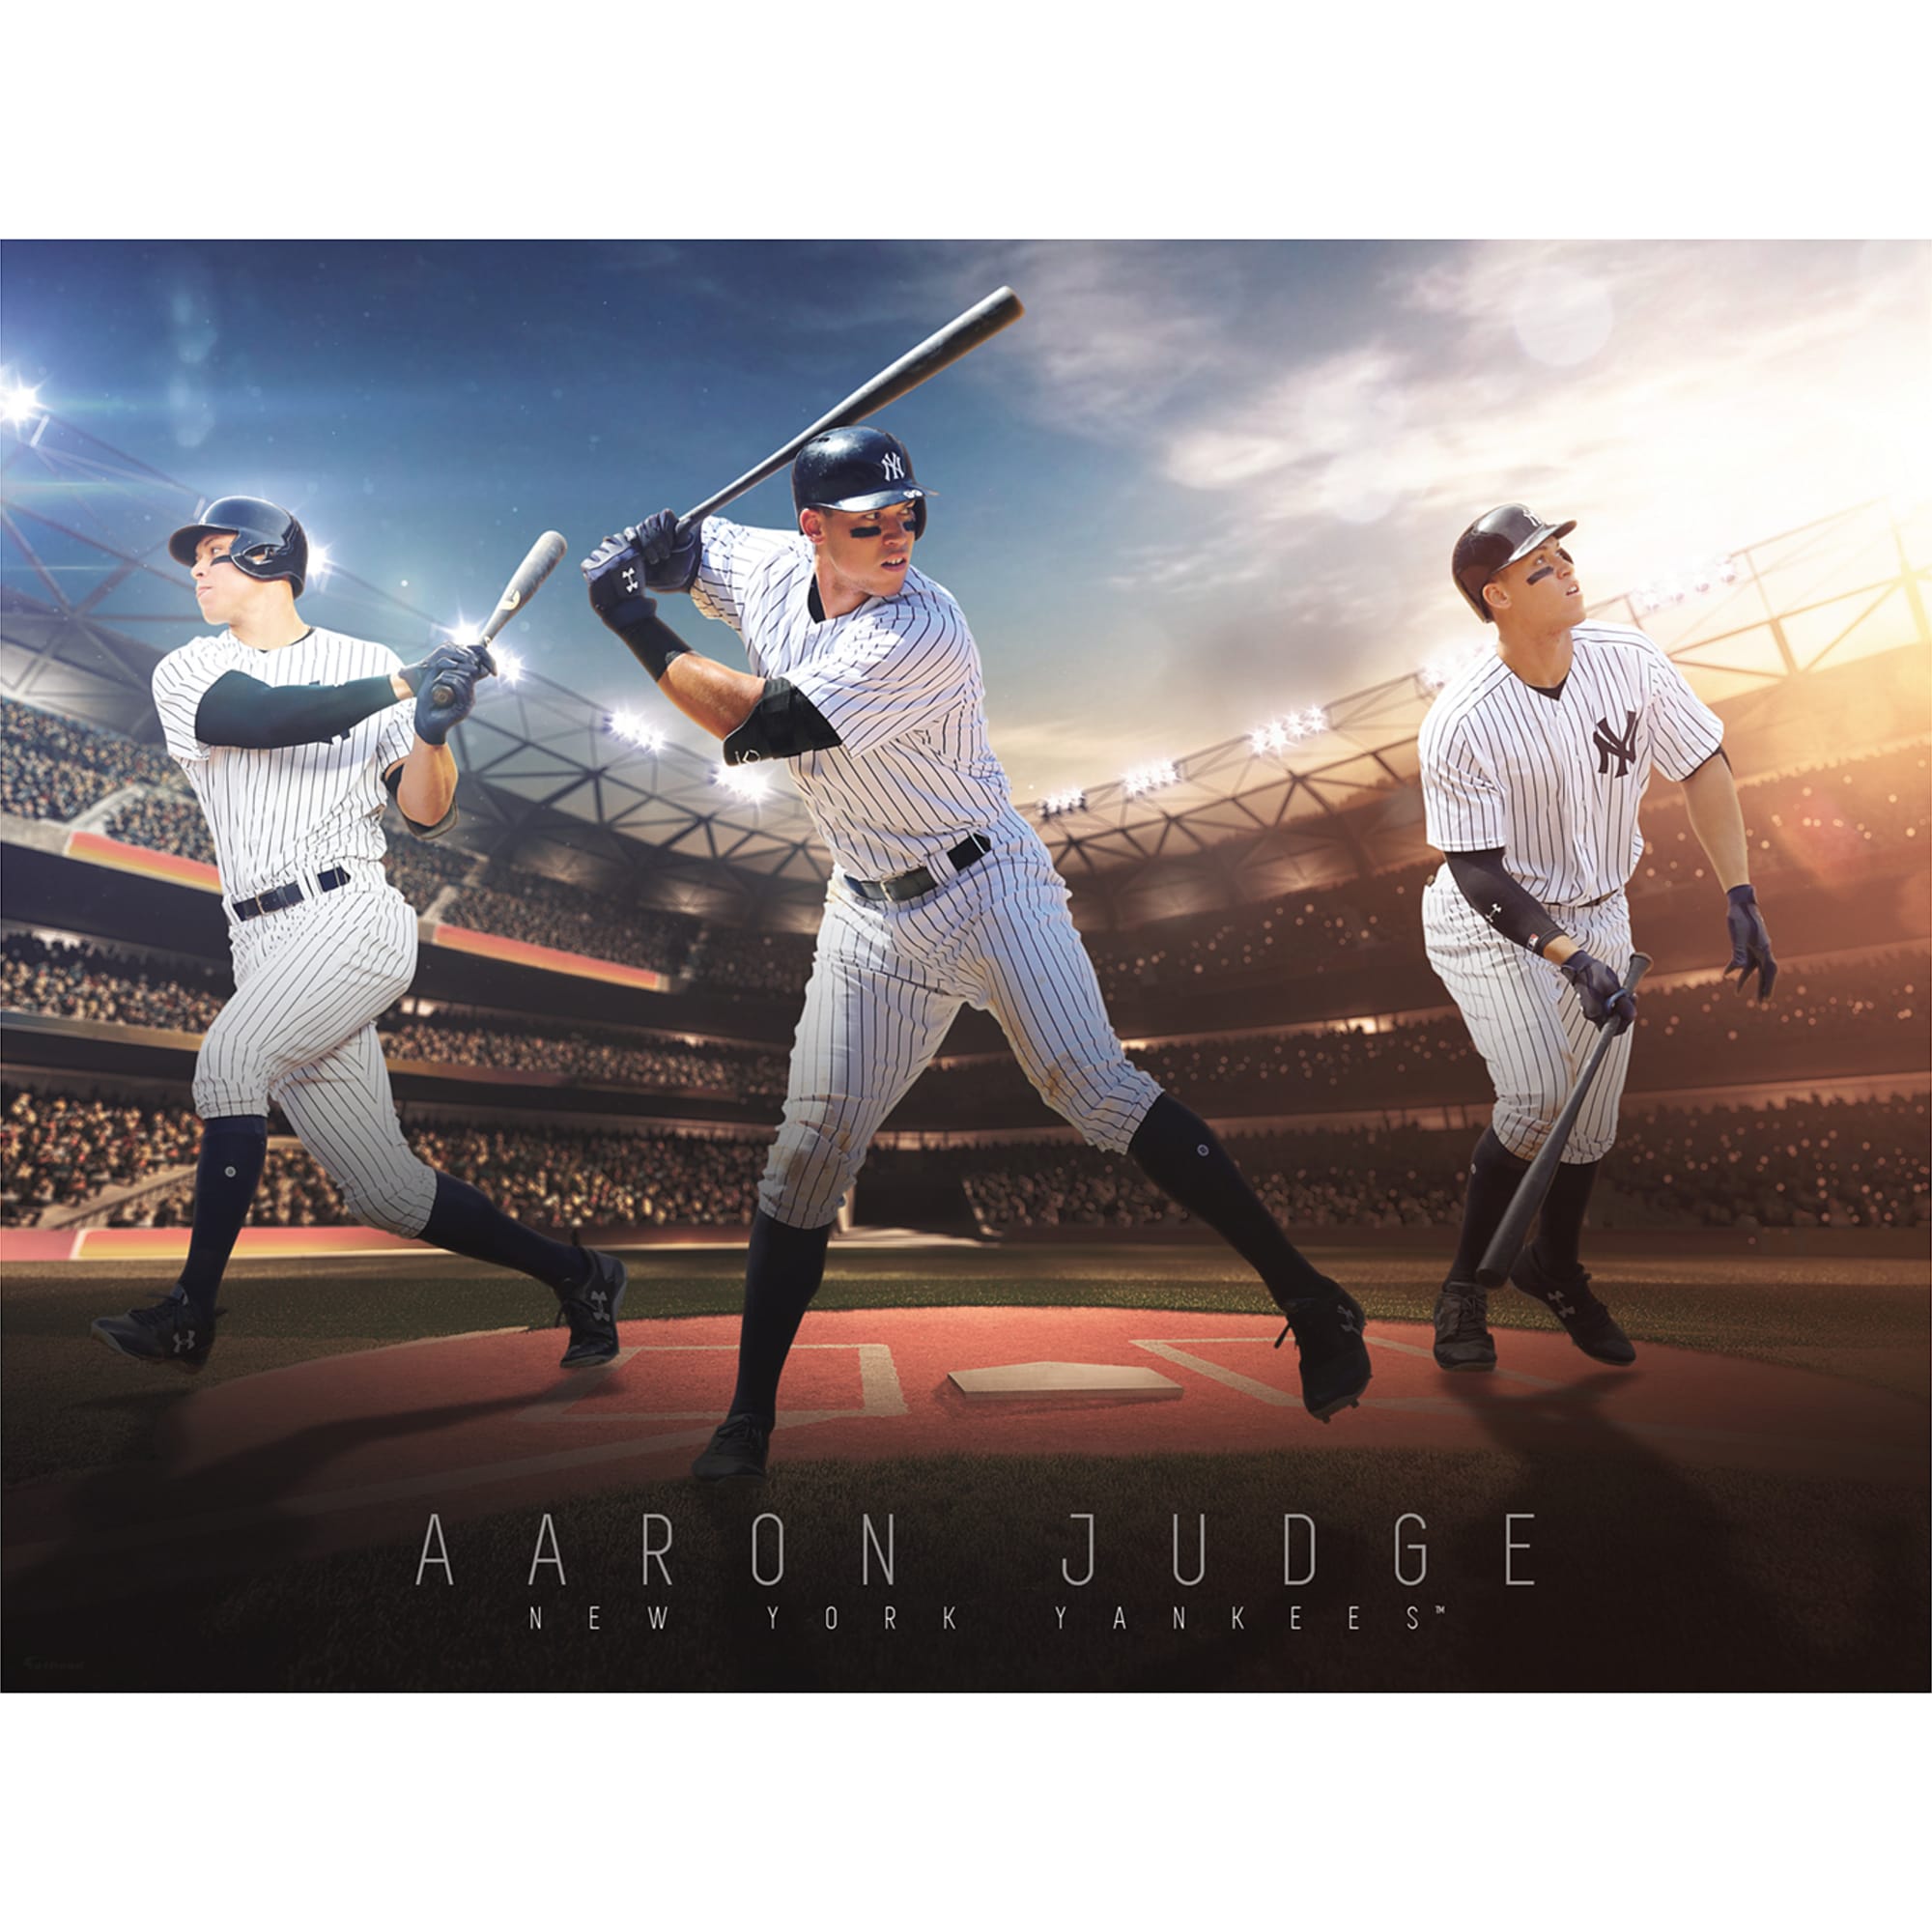 New York Yankees: Aaron Judge Montage Mural - Officially Licensed MLB –  Fathead